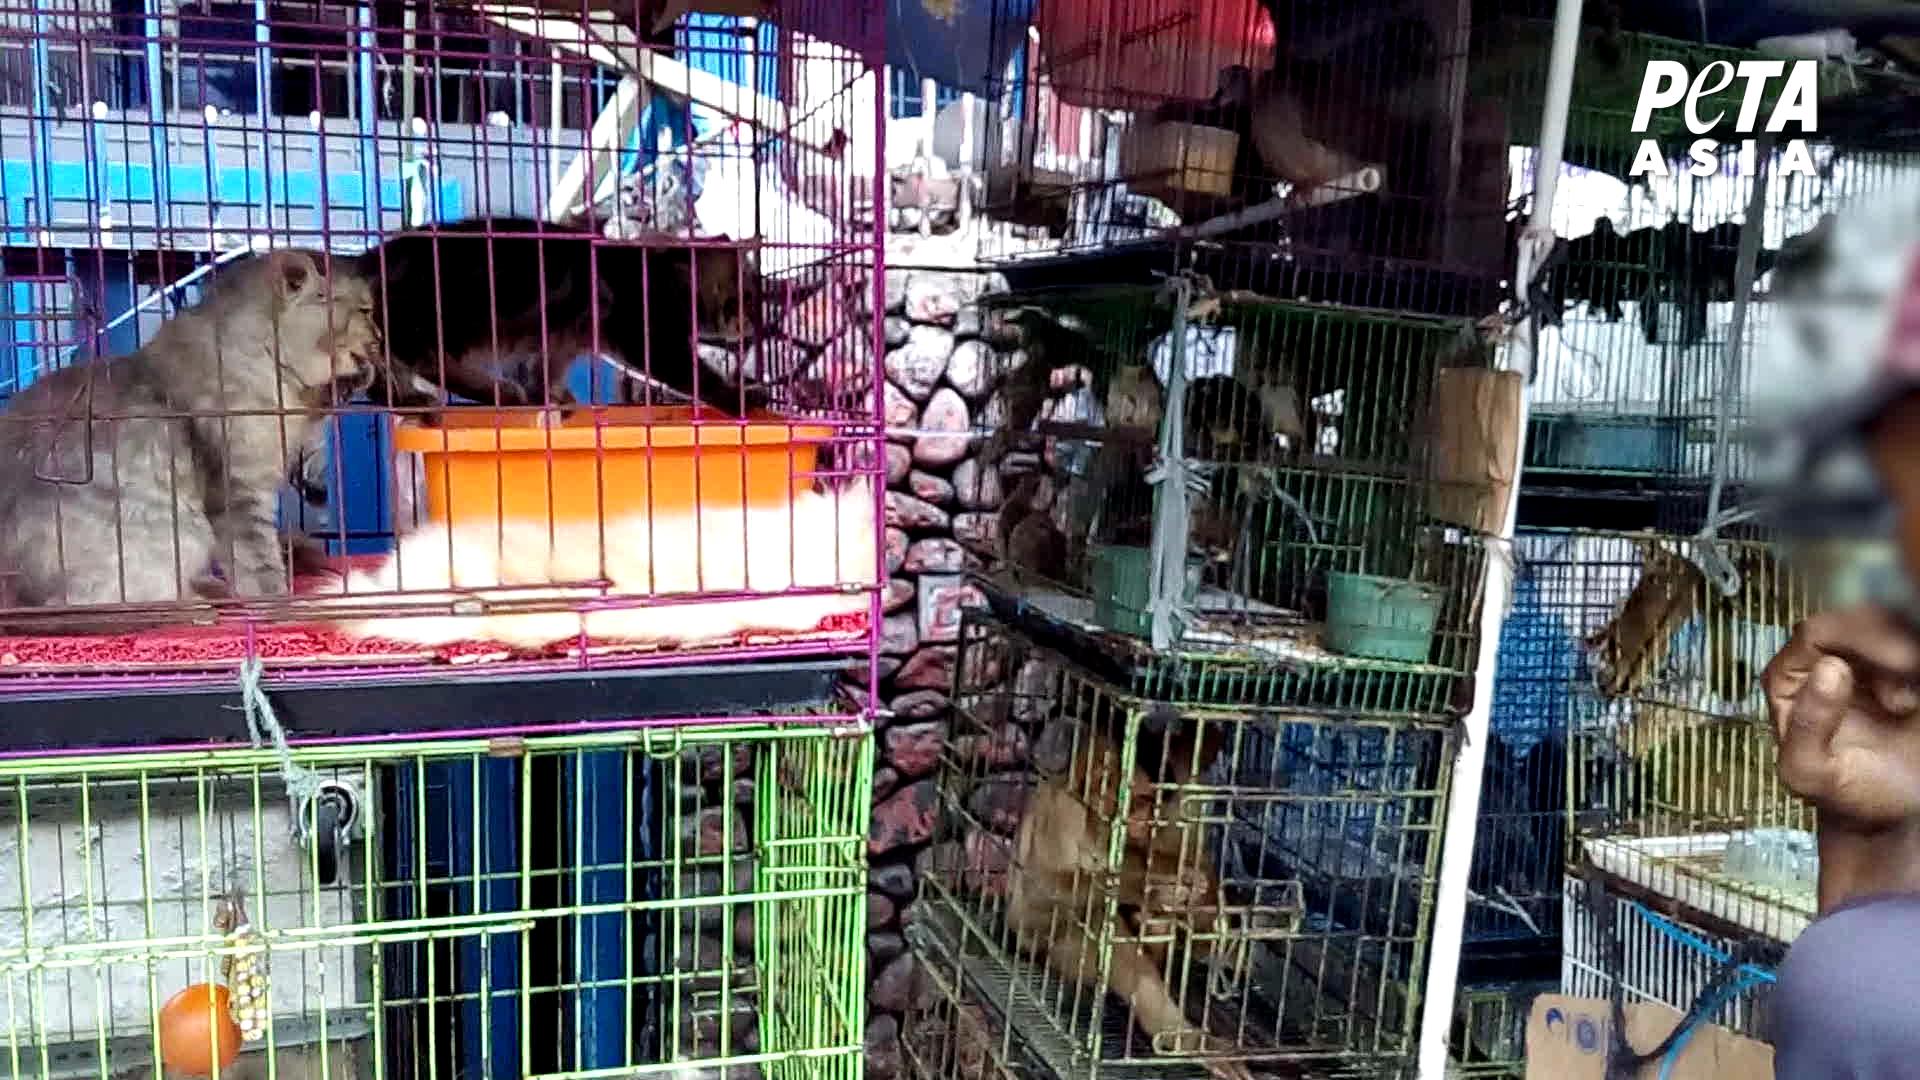 Animals next to each other at live animal market